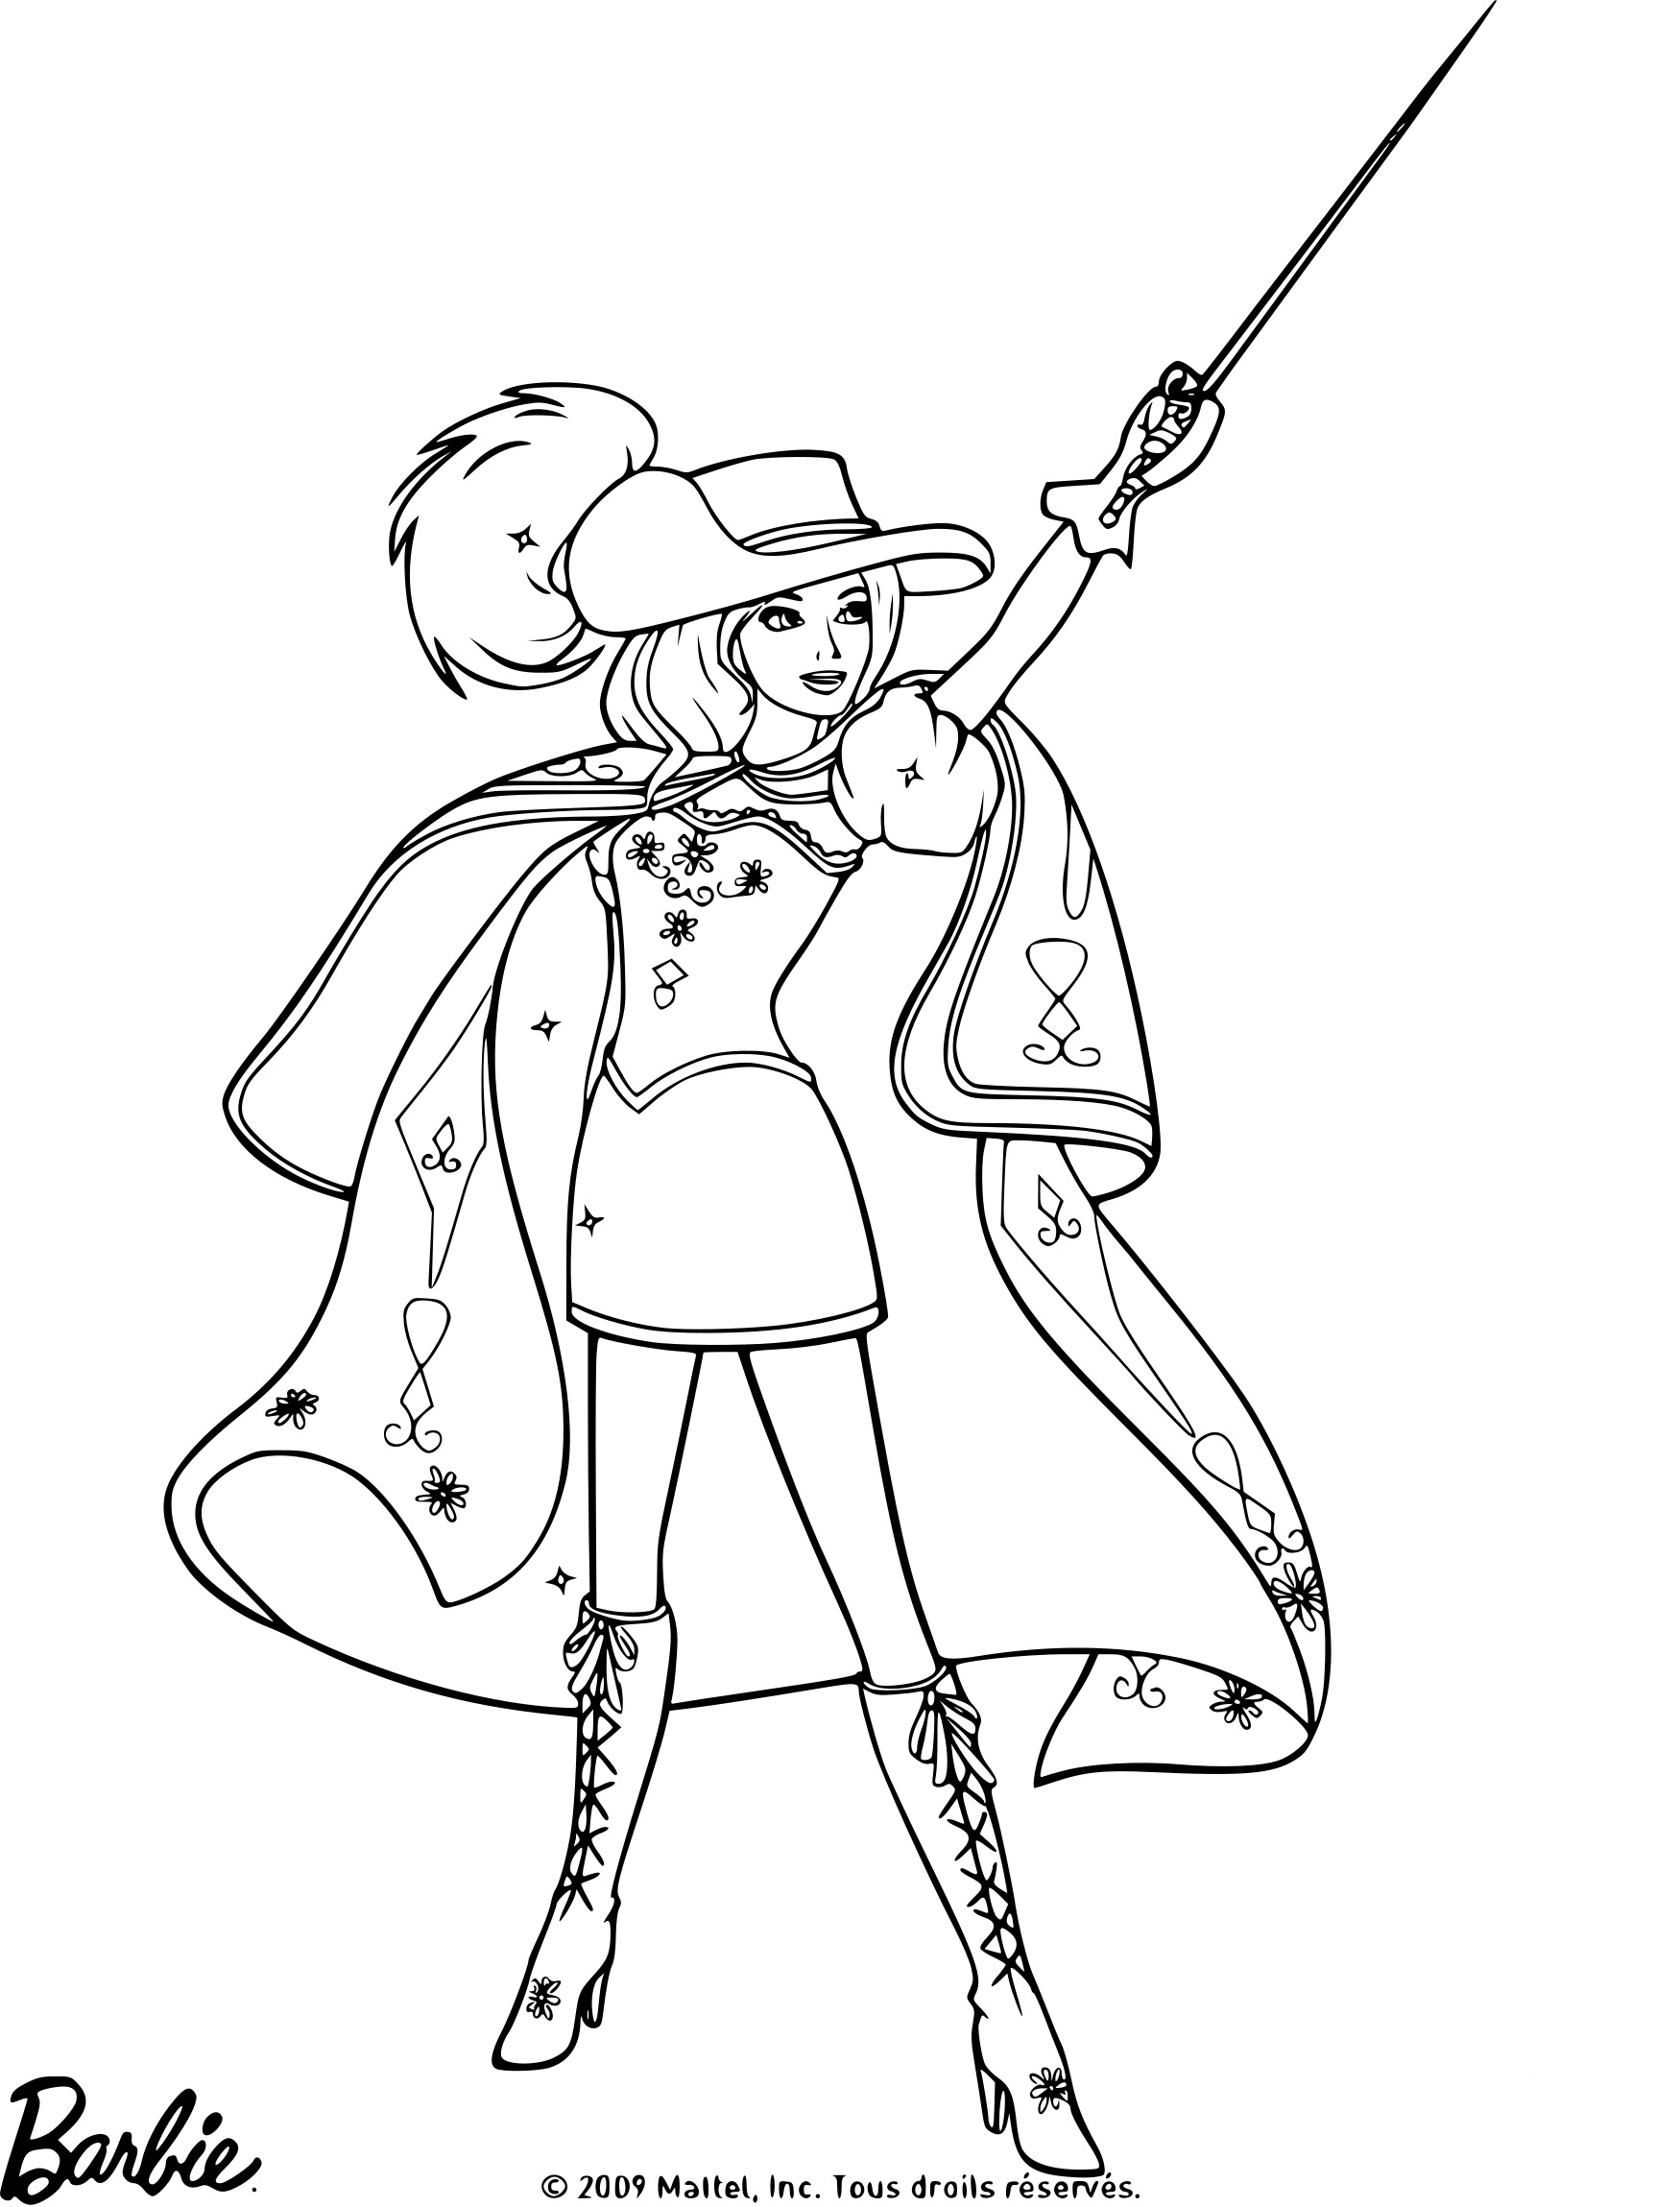 Barbie Musketeer coloring page